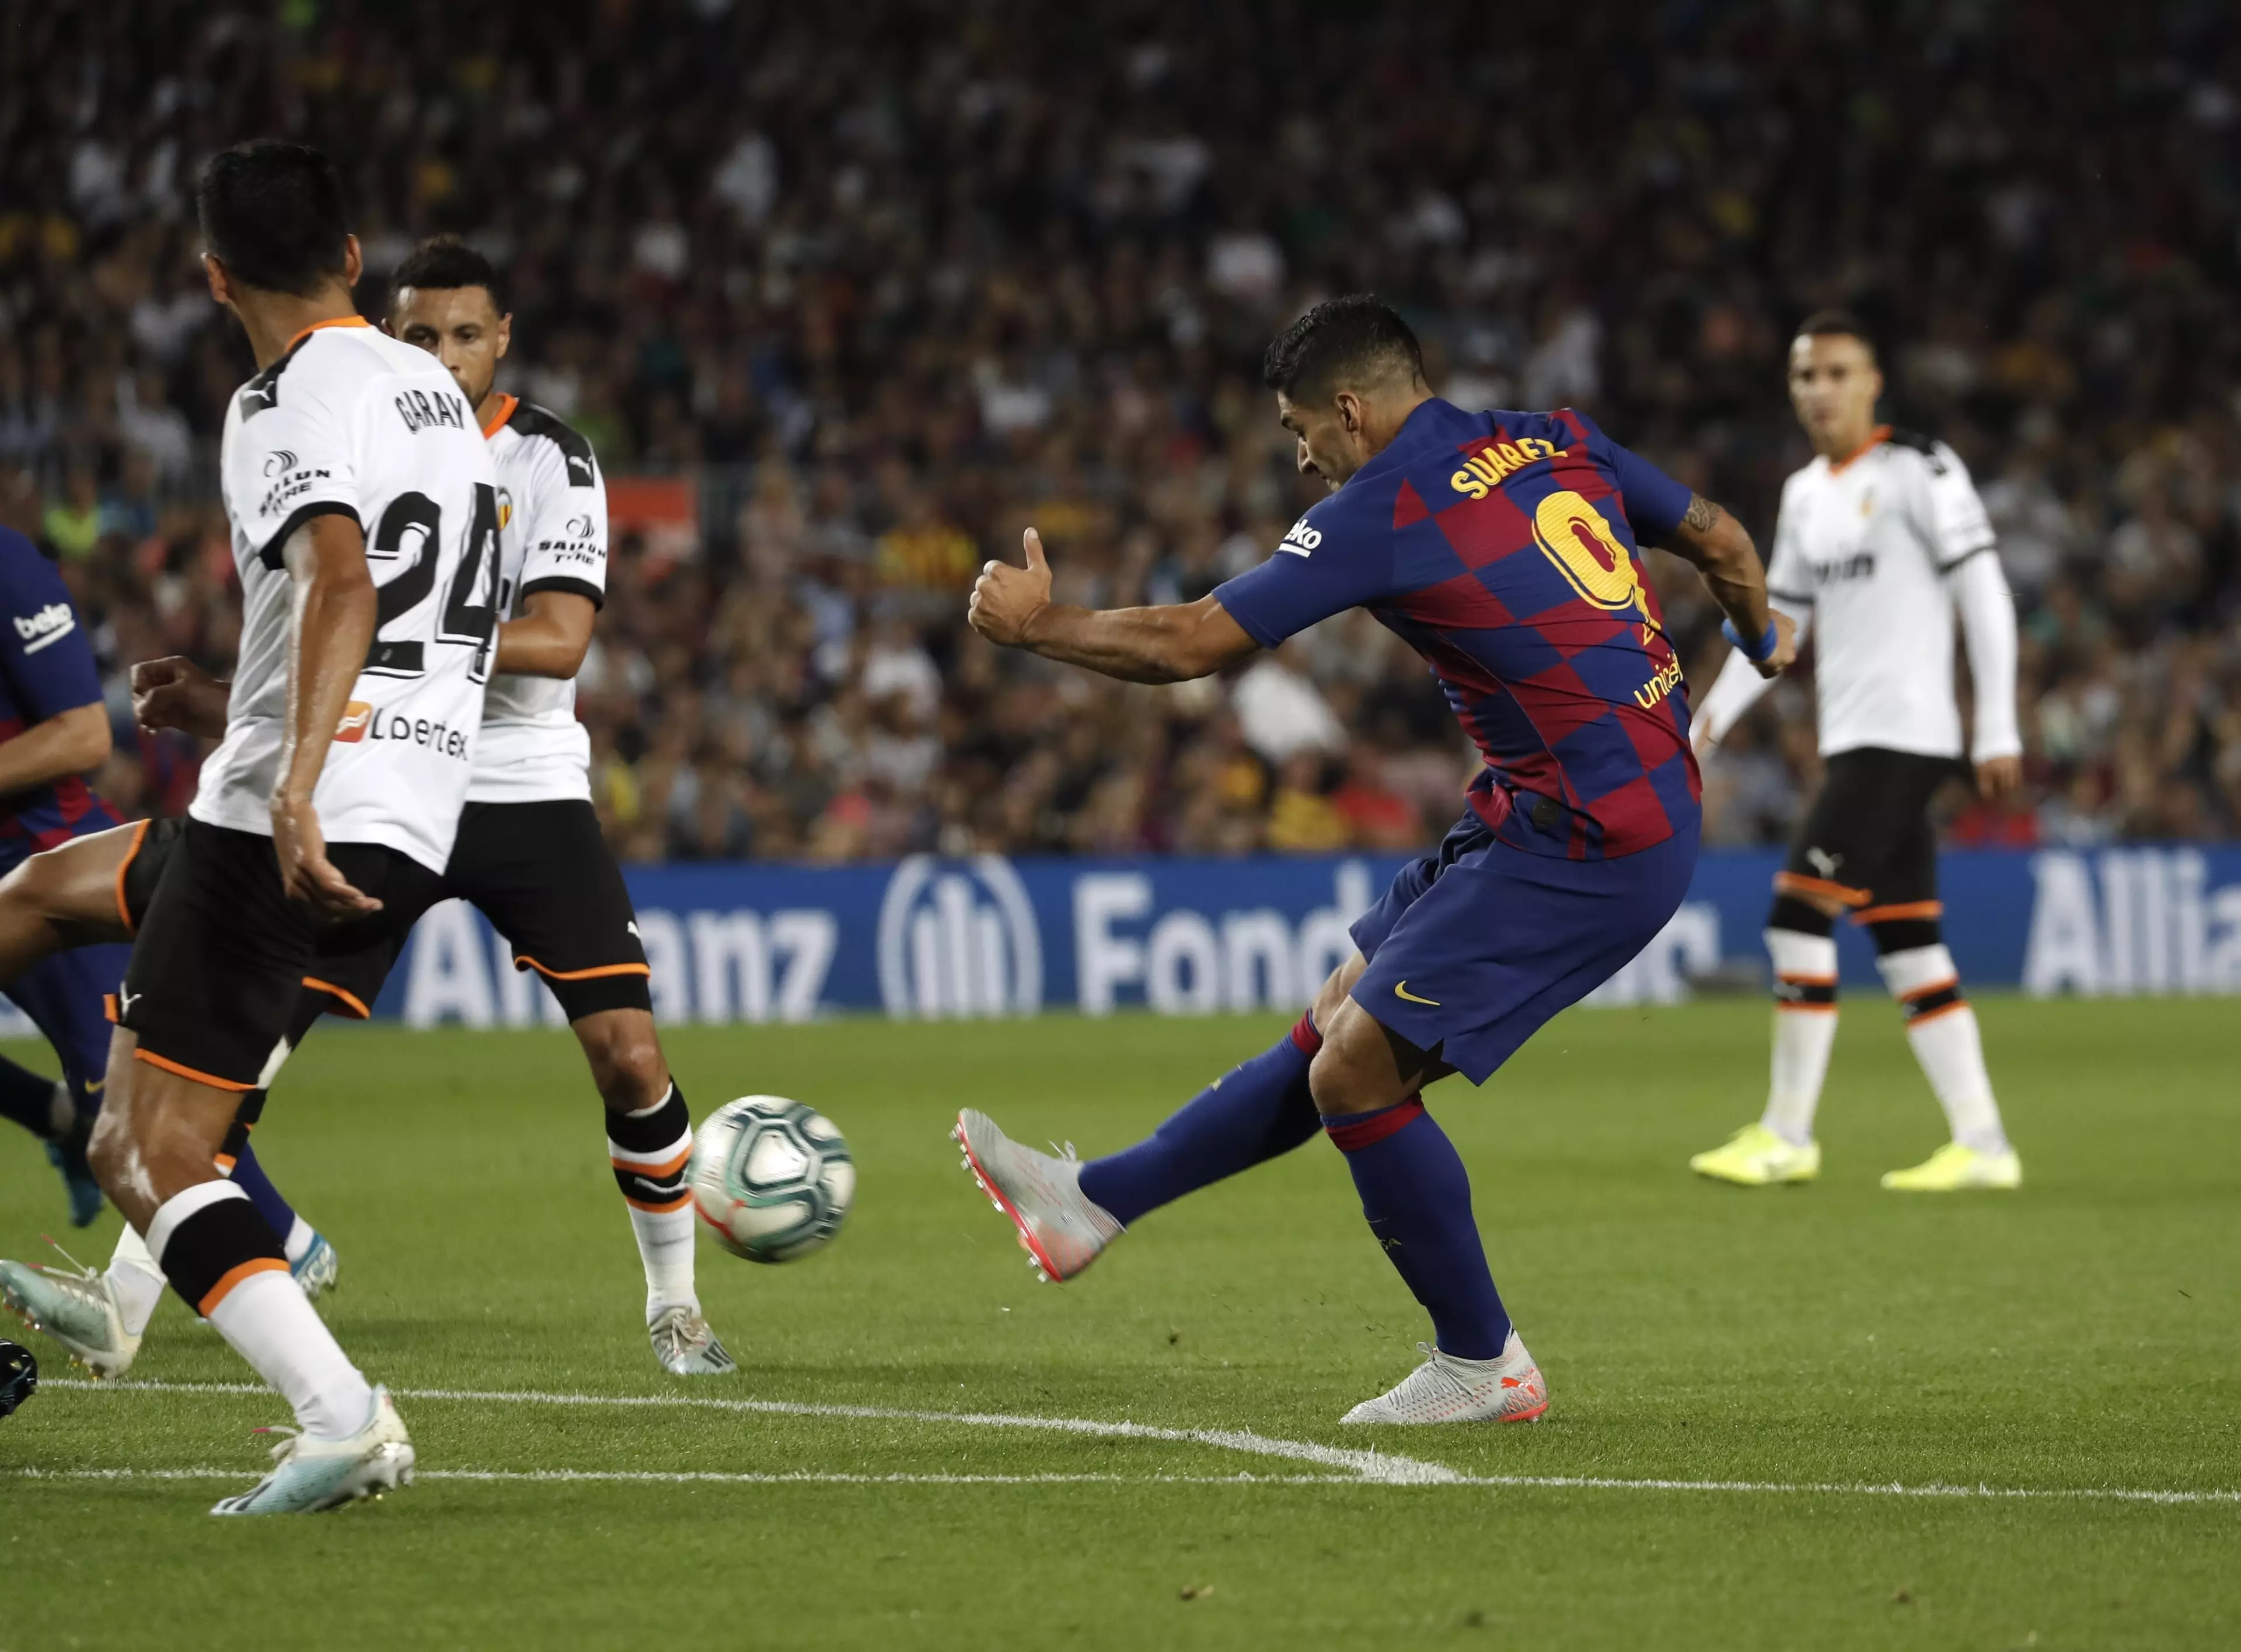 Luis Suarez scored a second-half double in a 5-2 thrashing for Barcelona